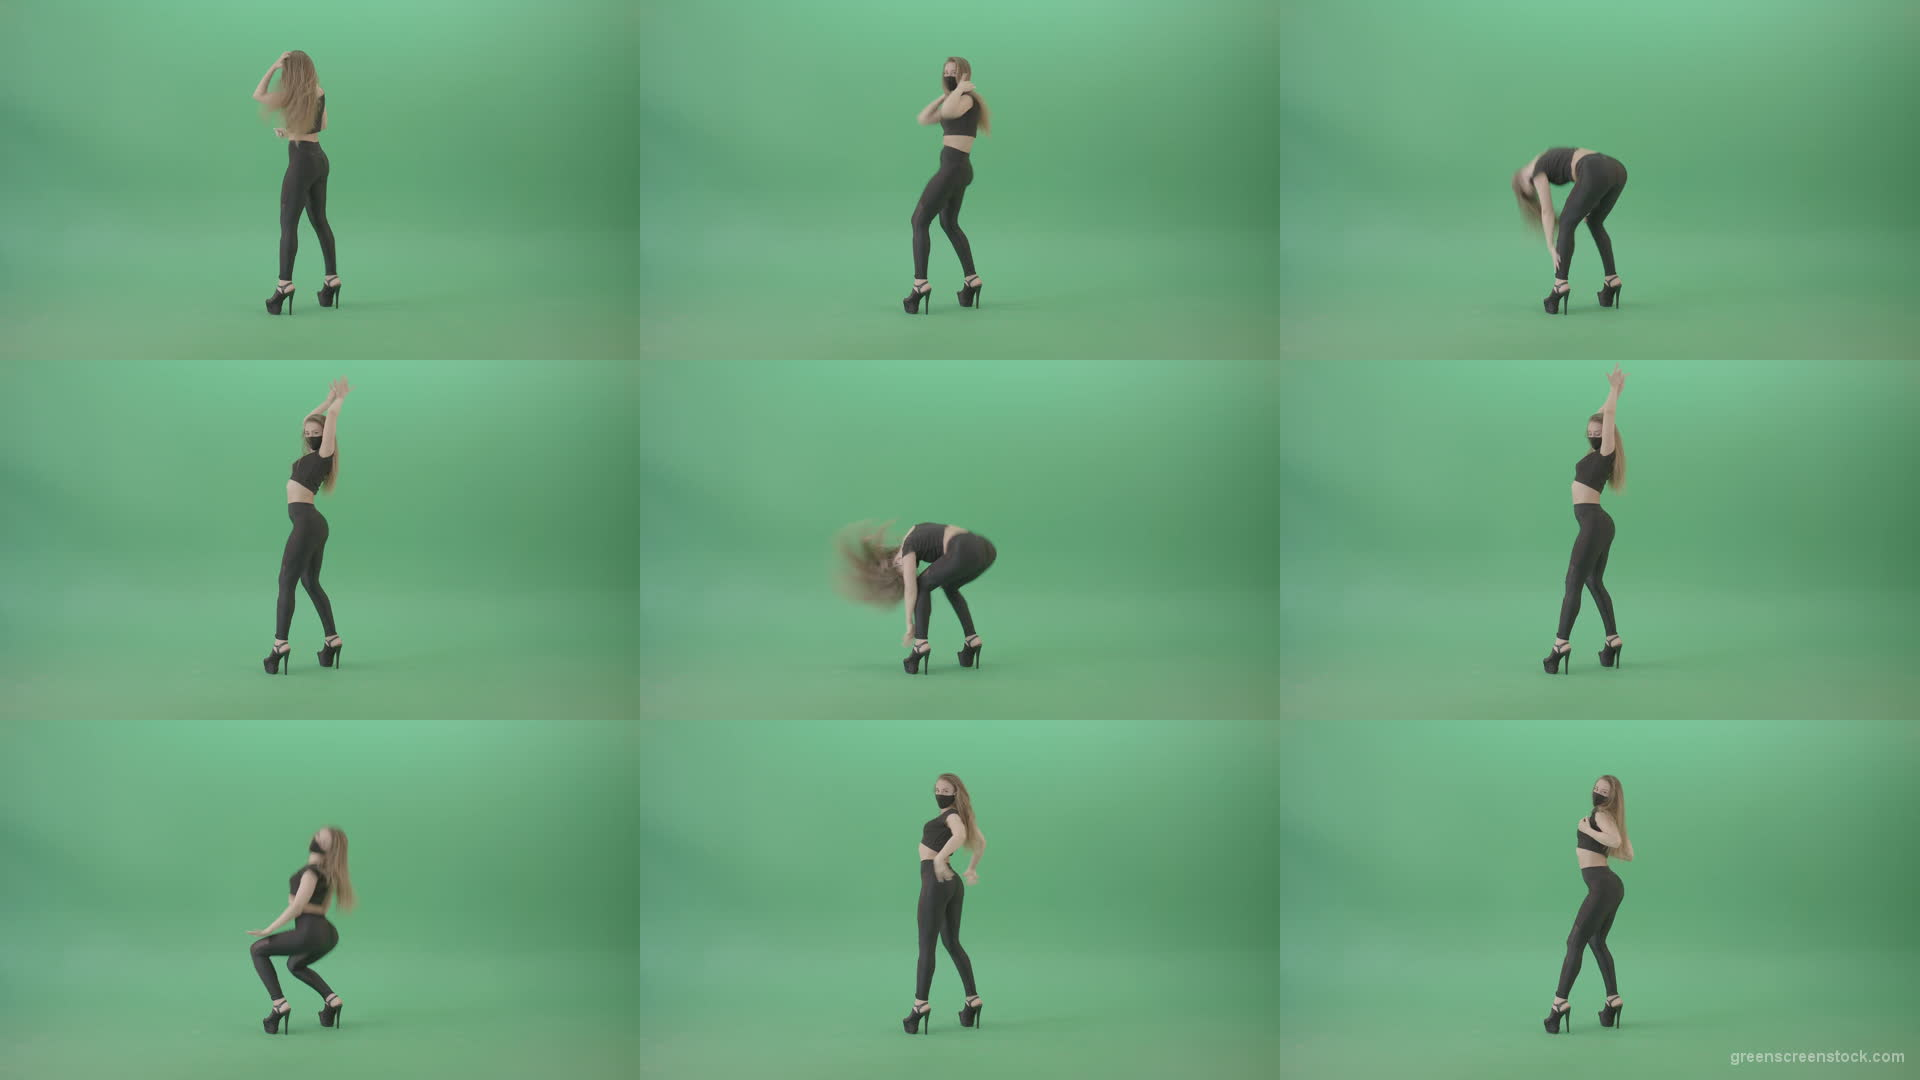 Exotic-sexy-dance-by-girl-in-black-latex-dress-isolated-on-green-screen-4K-Video-Footage-1920 Green Screen Stock